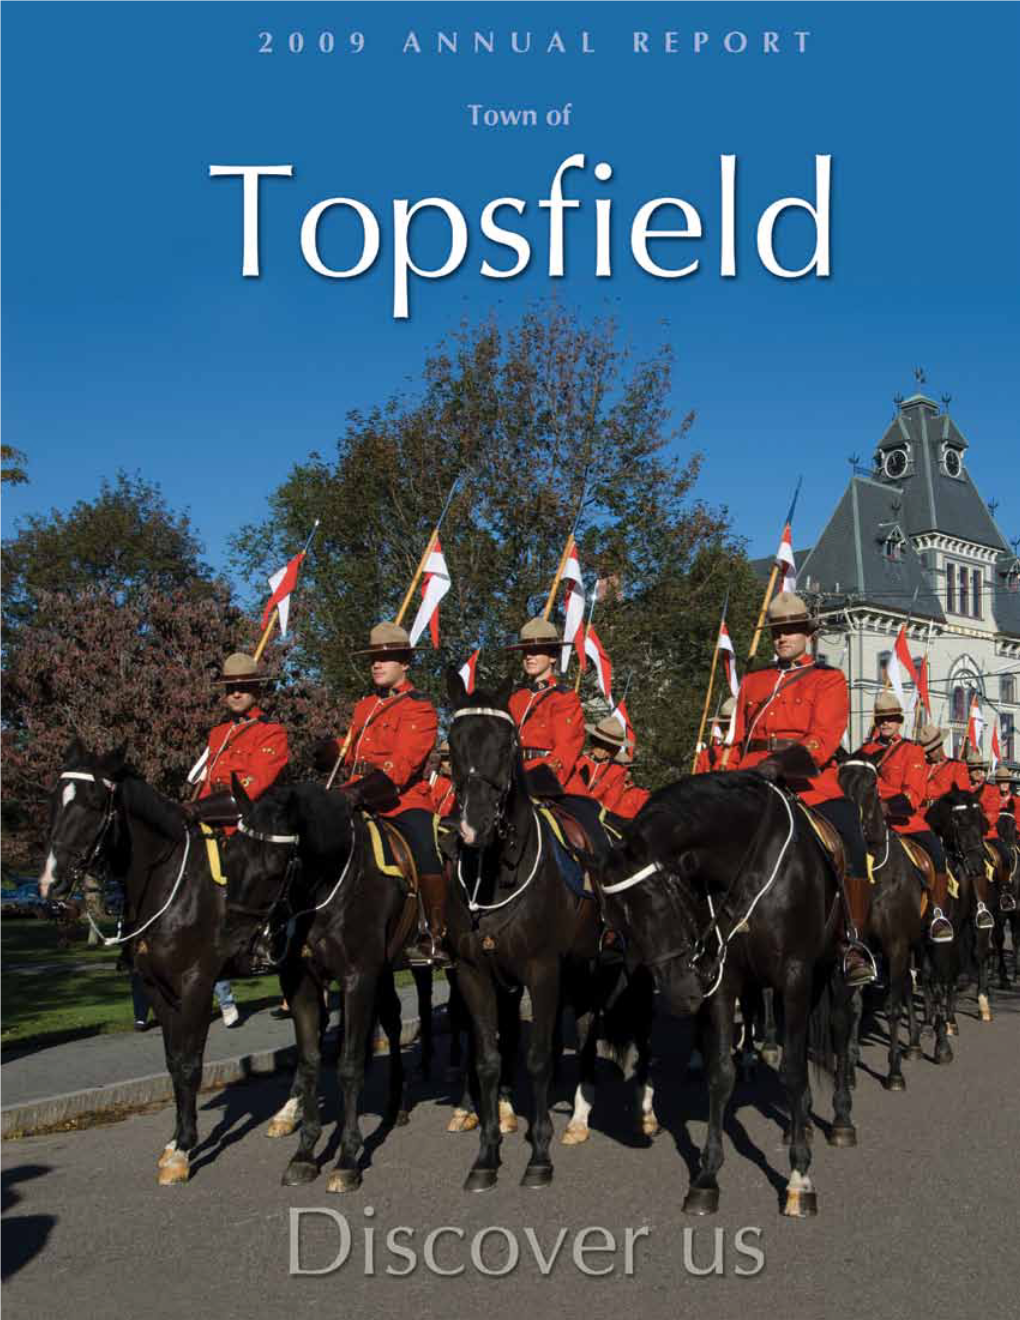 Town of Topsfield 2009 Annual Report